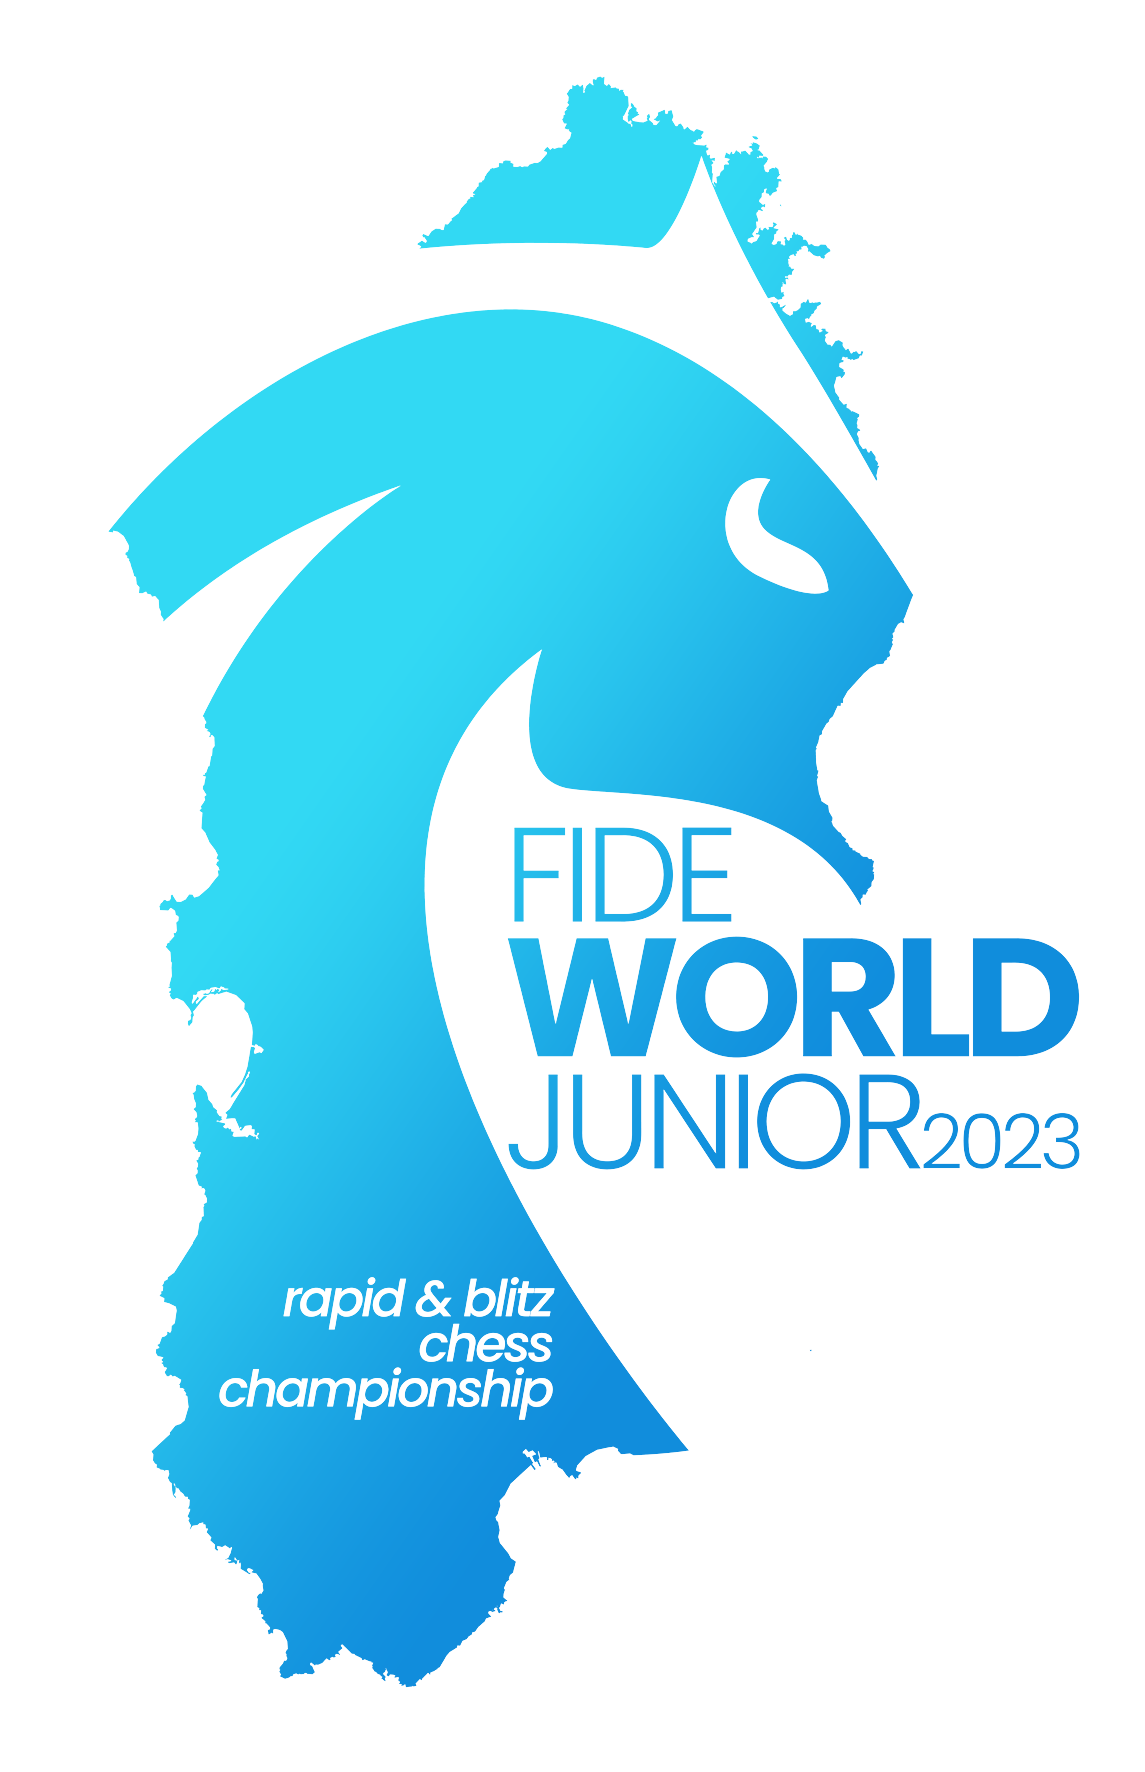 FIDE World Cup Special Page